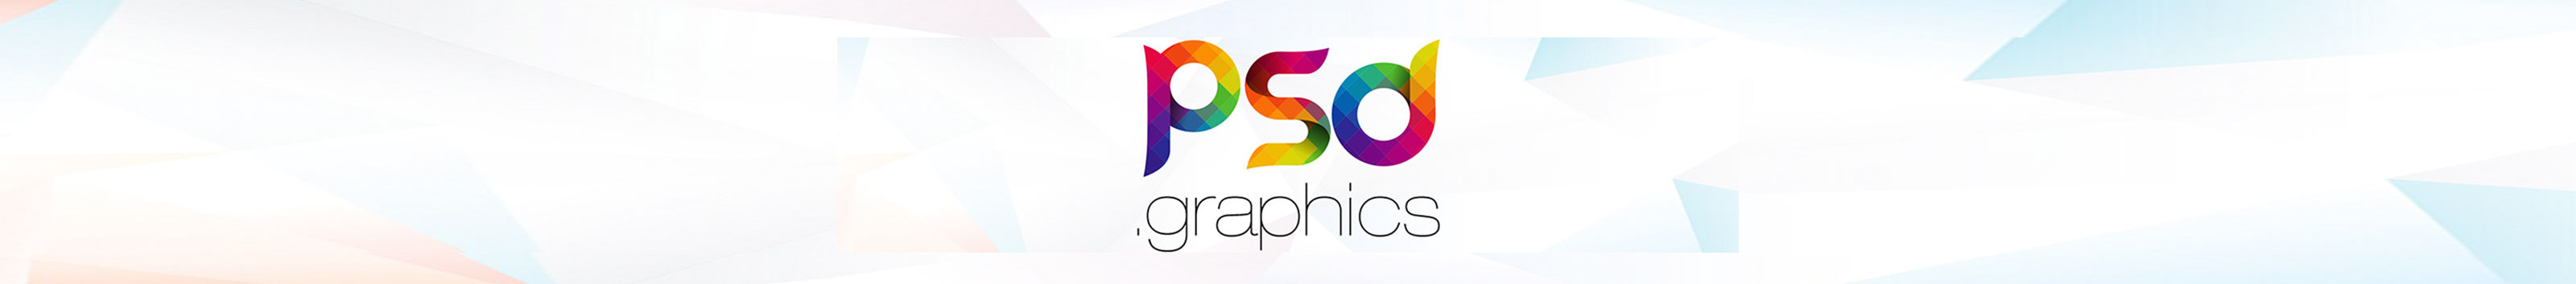 psd graphics's profile banner